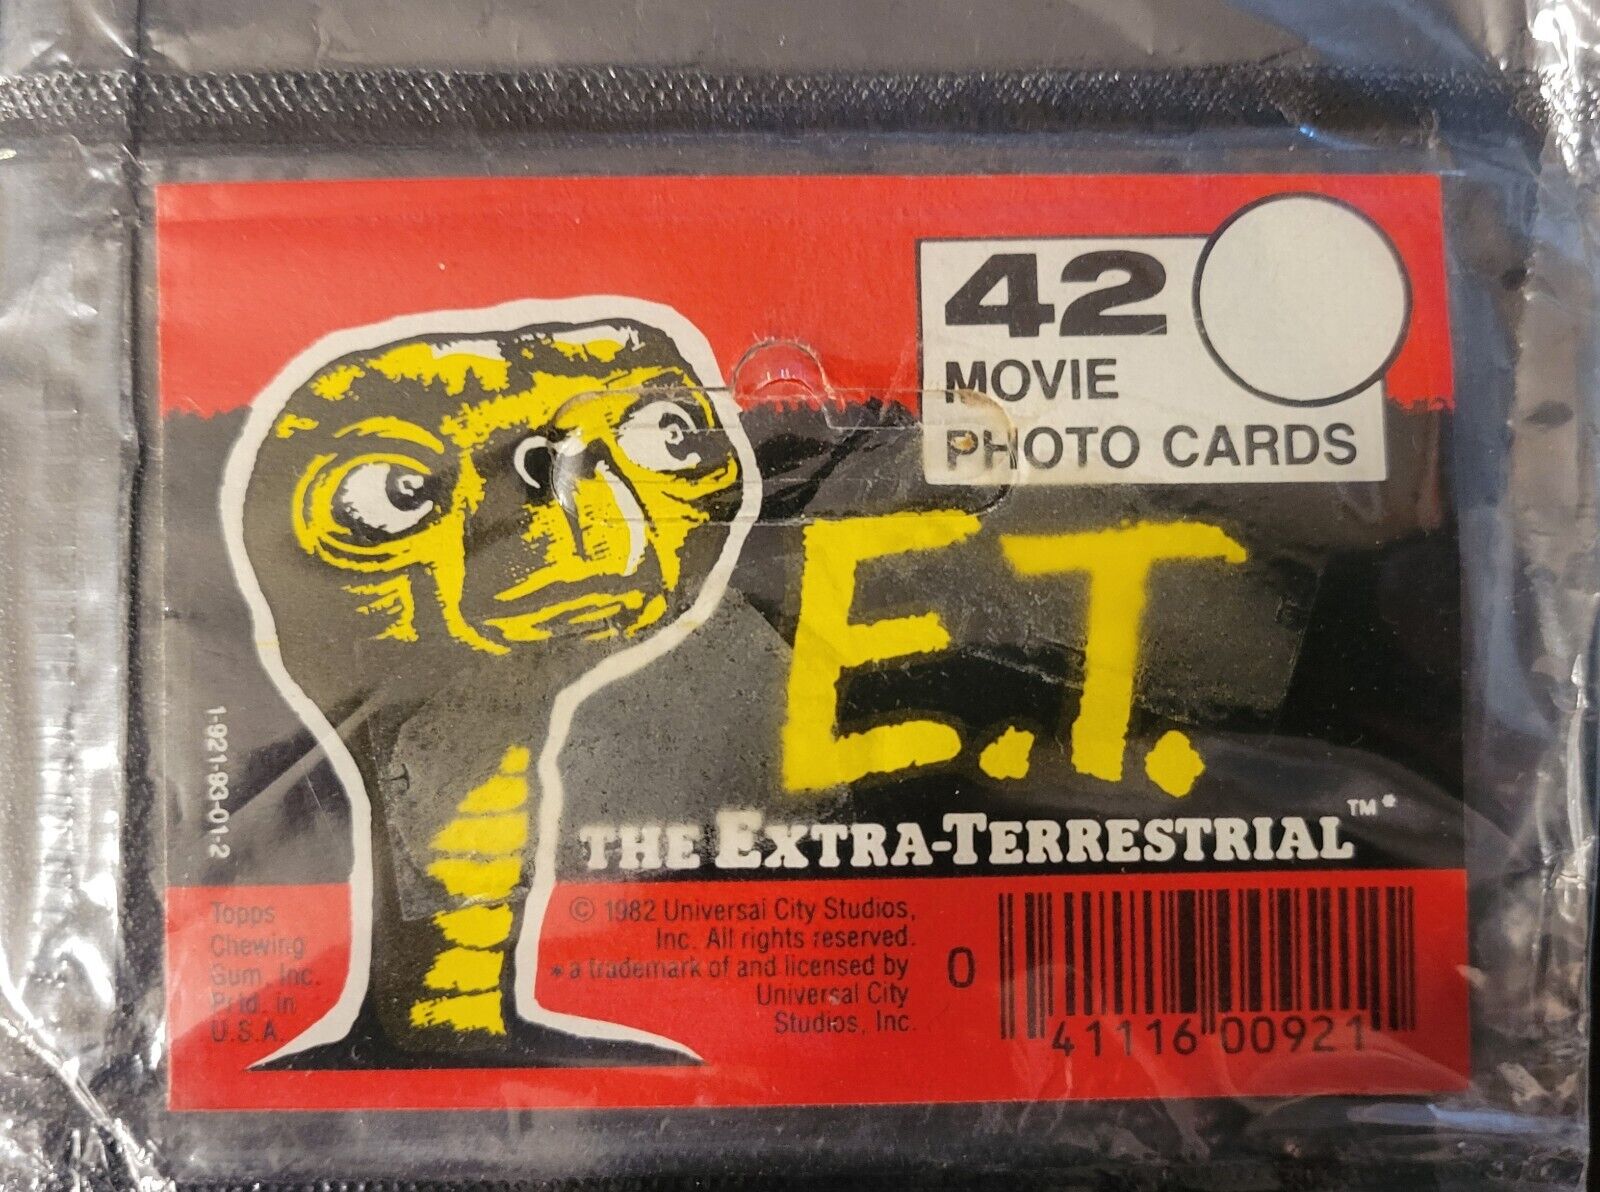 Vintage 1982 Topps E.T. 42 Sealed Movie Photo Cards “The Extra-Terrestrial” NIP